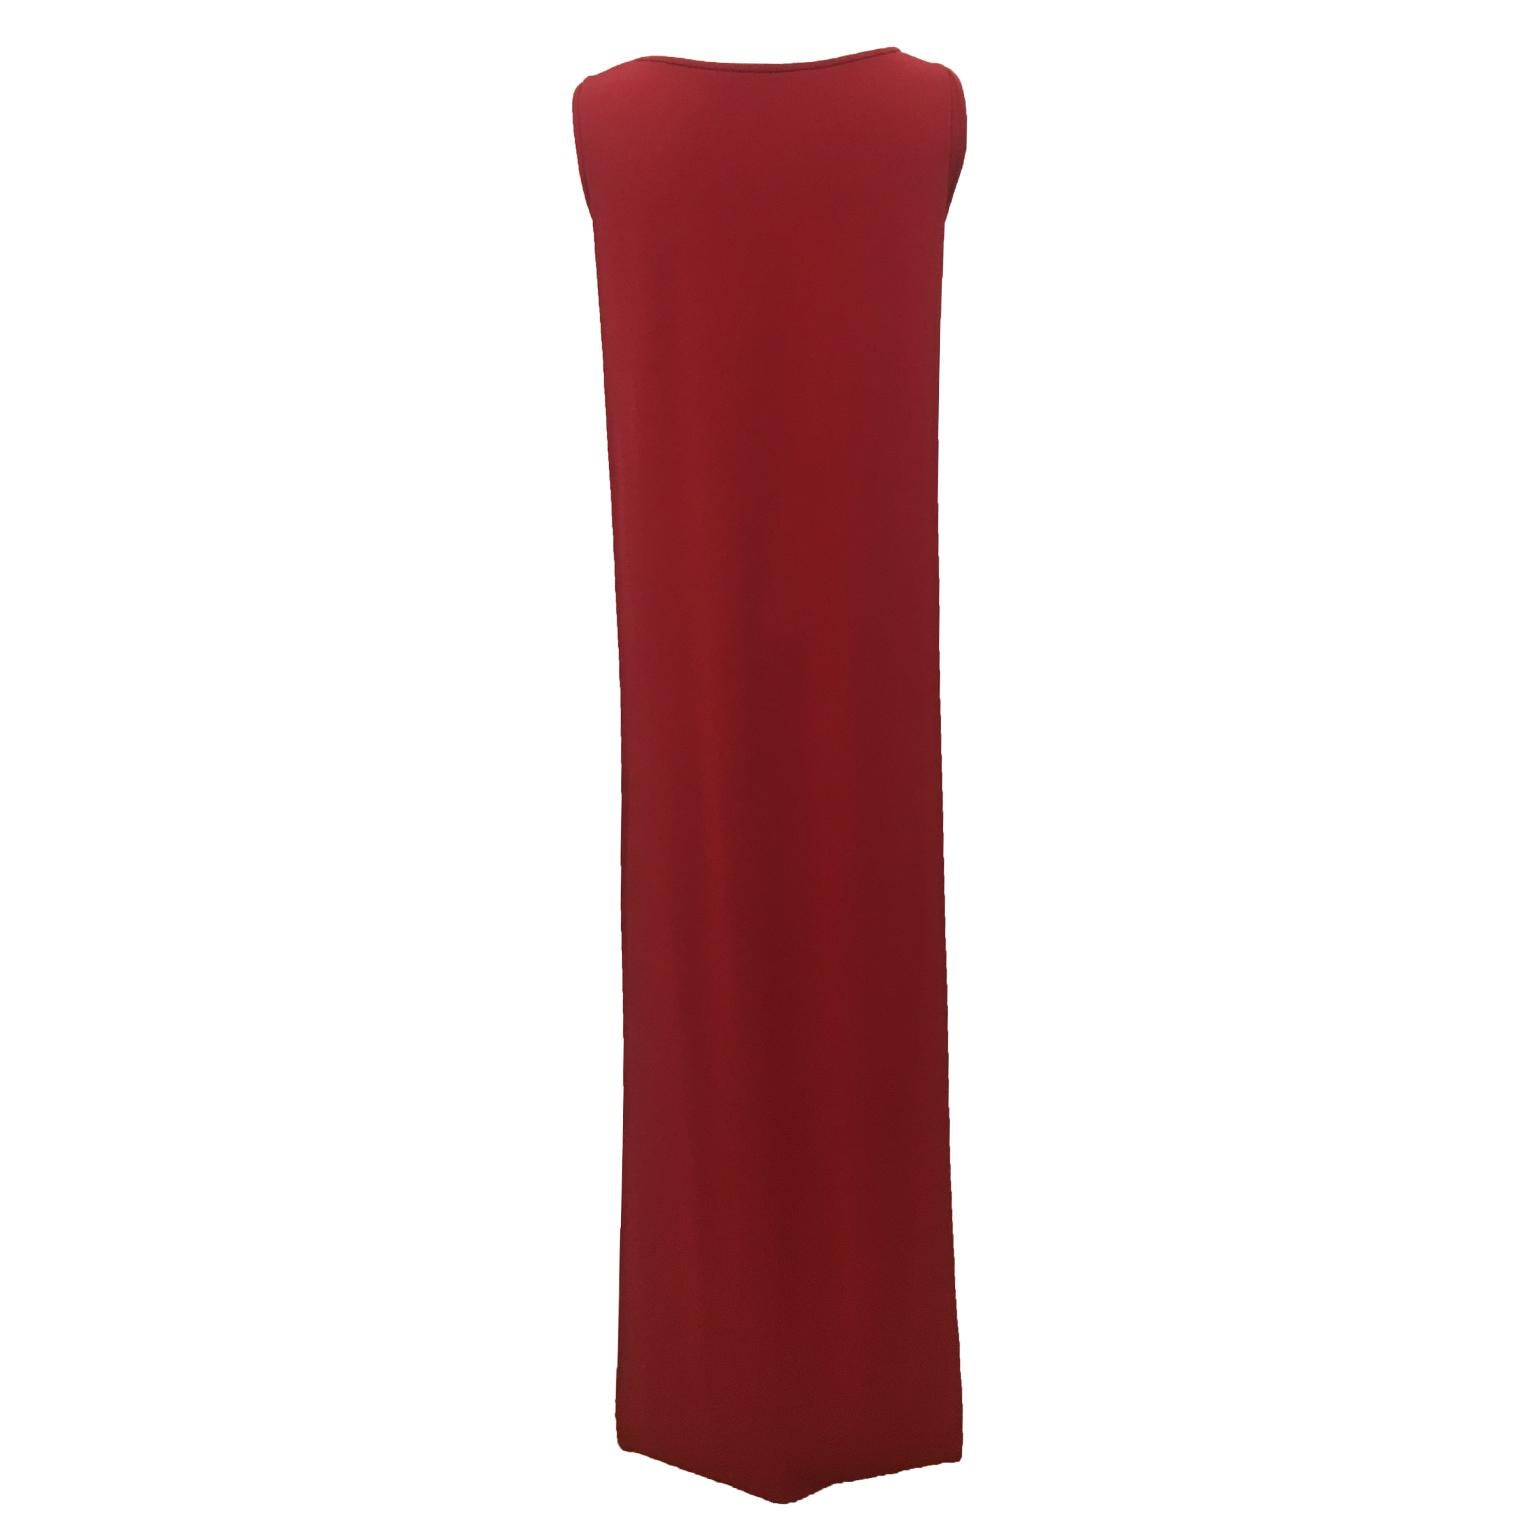 Chalayan Red Dress Show Runway Piece Panoramic AW 1998 In Good Condition For Sale In Berlin, DE